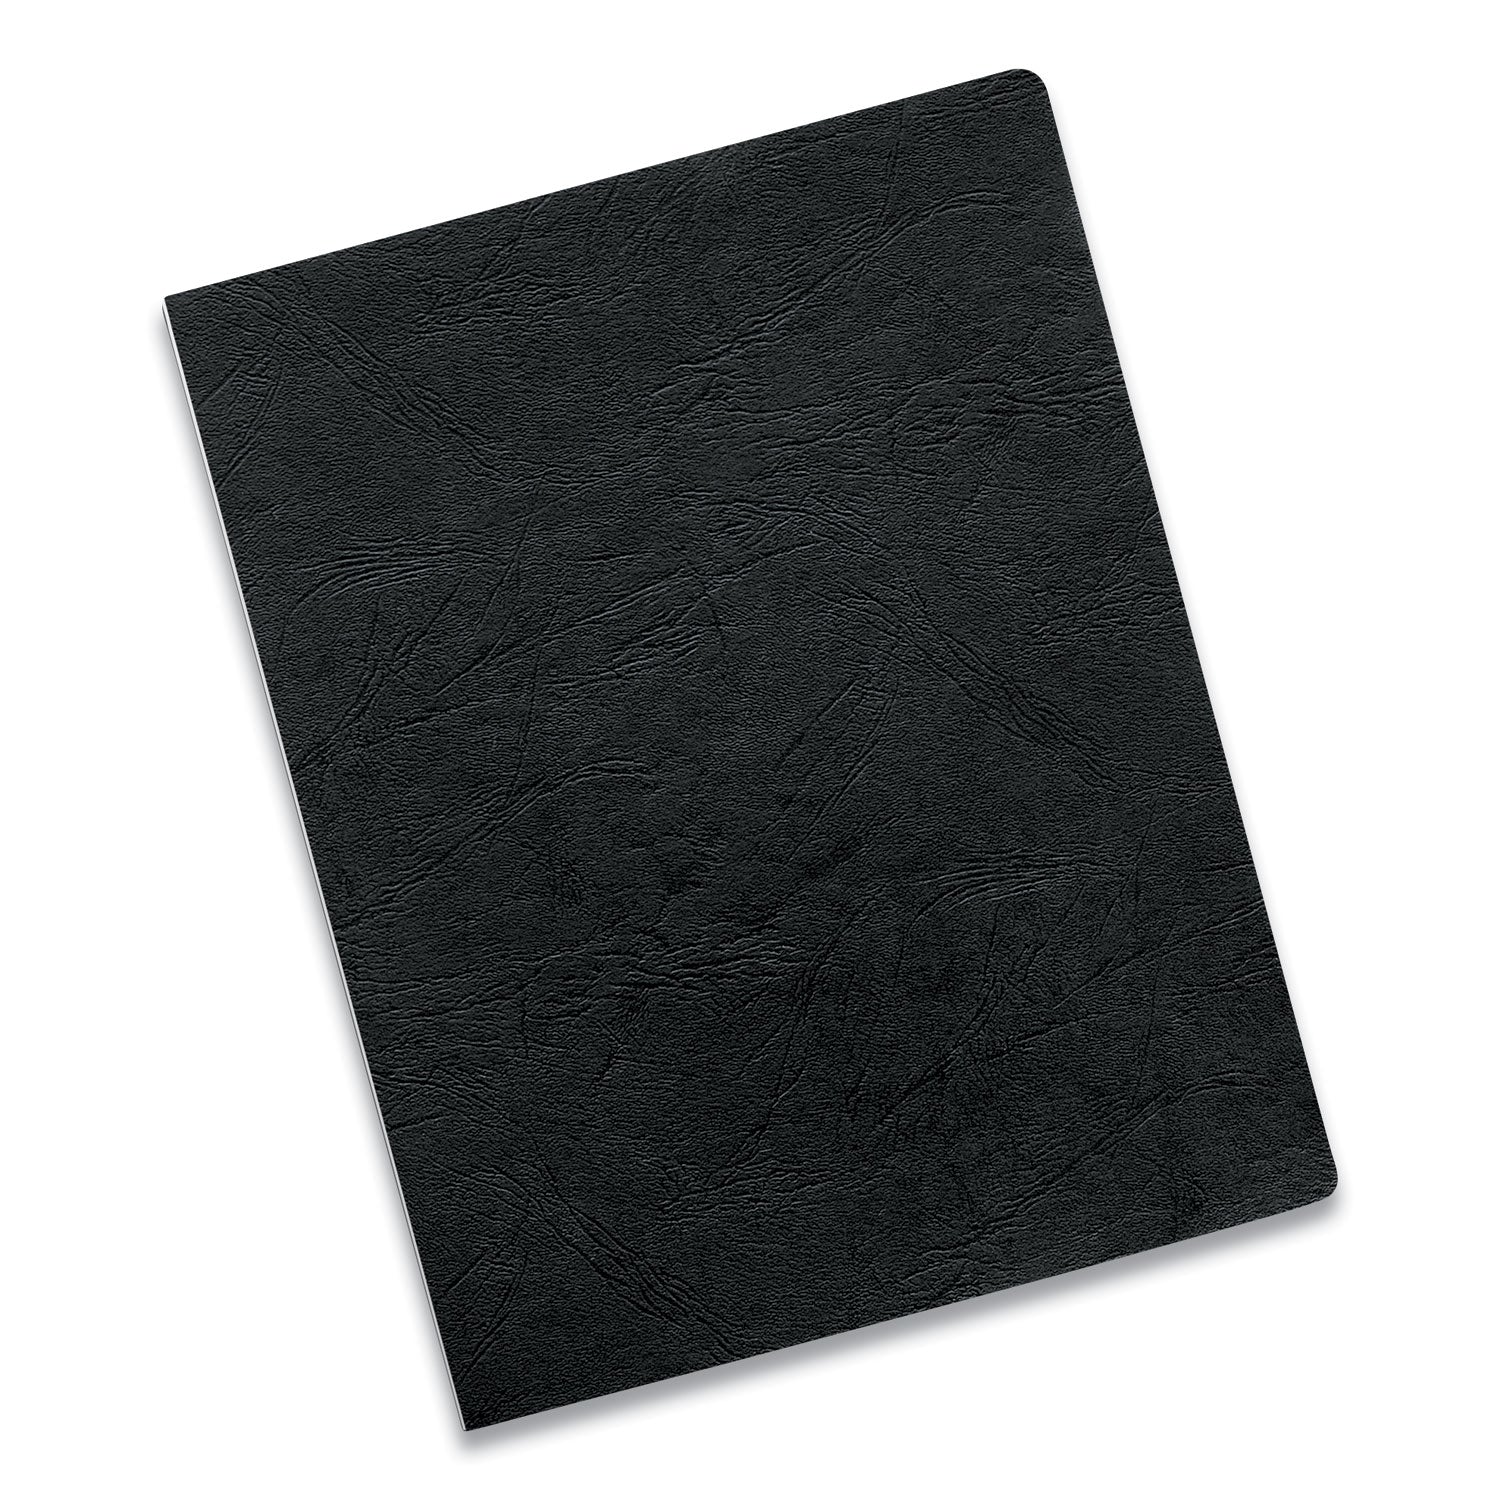 Executive Leather-Like Presentation Cover, Black, 11.25 x 8.75, Unpunched, 200/Pack - 